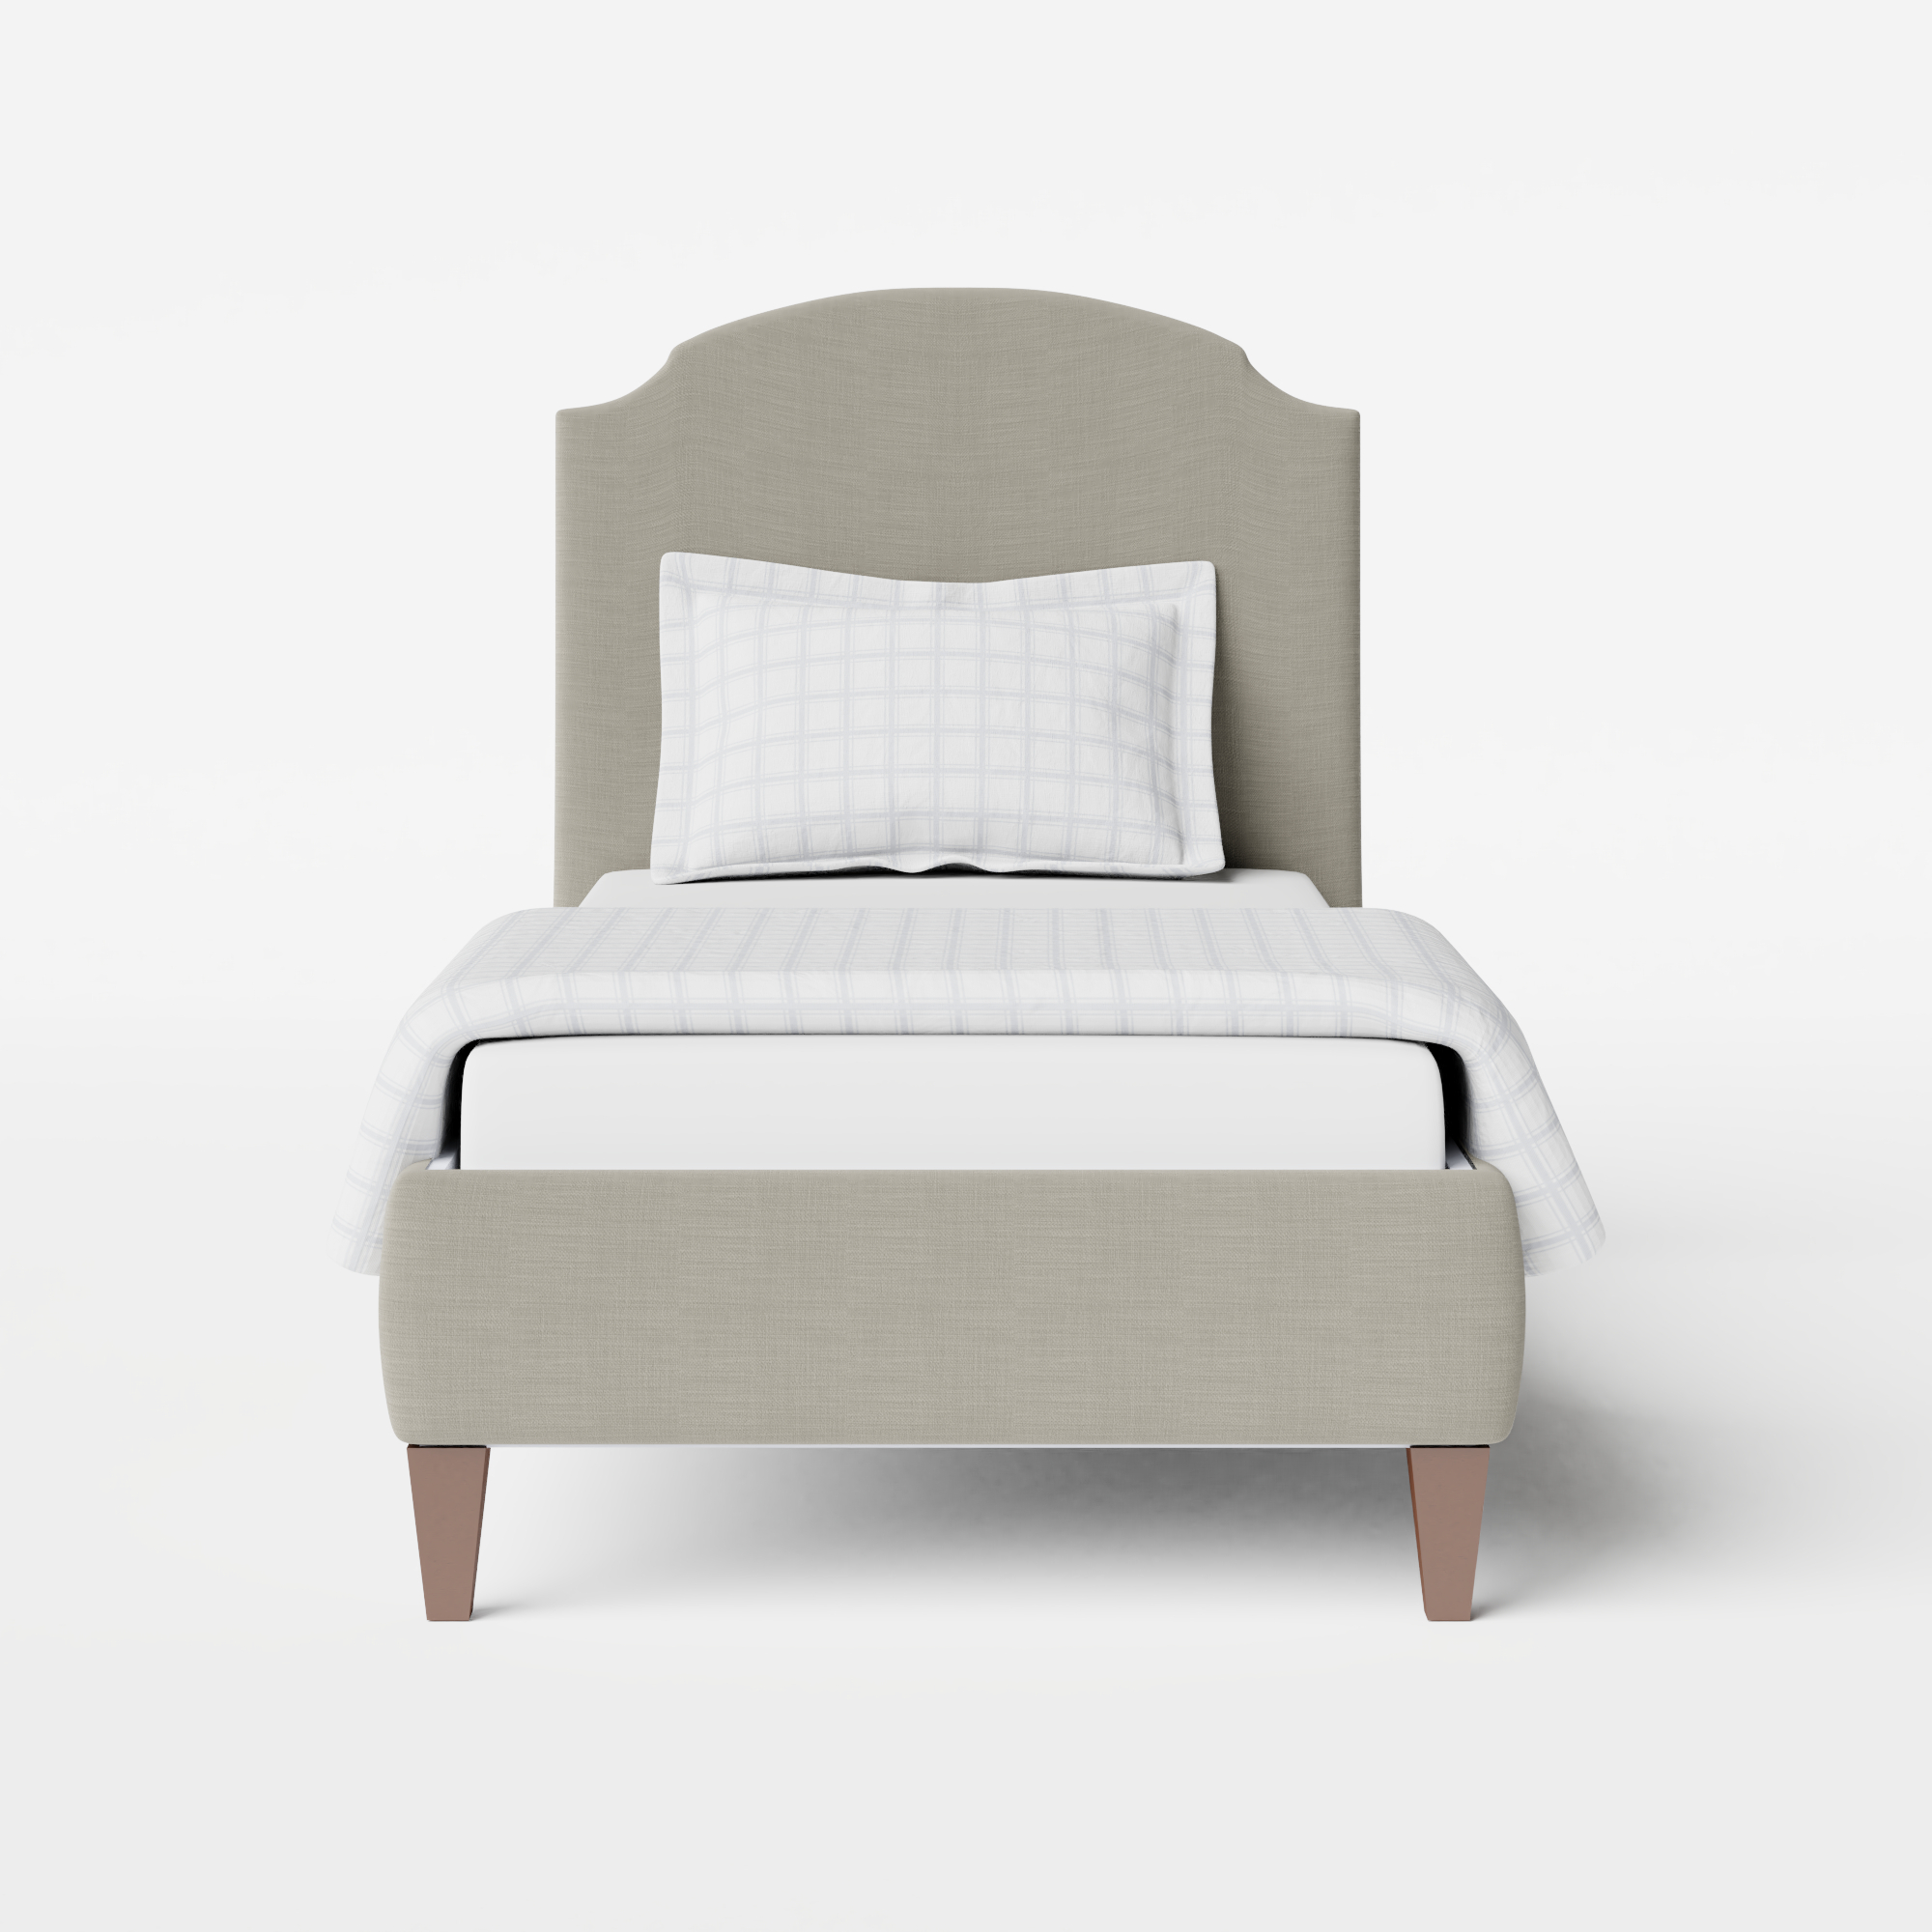 Lide upholstered single bed in grey fabric